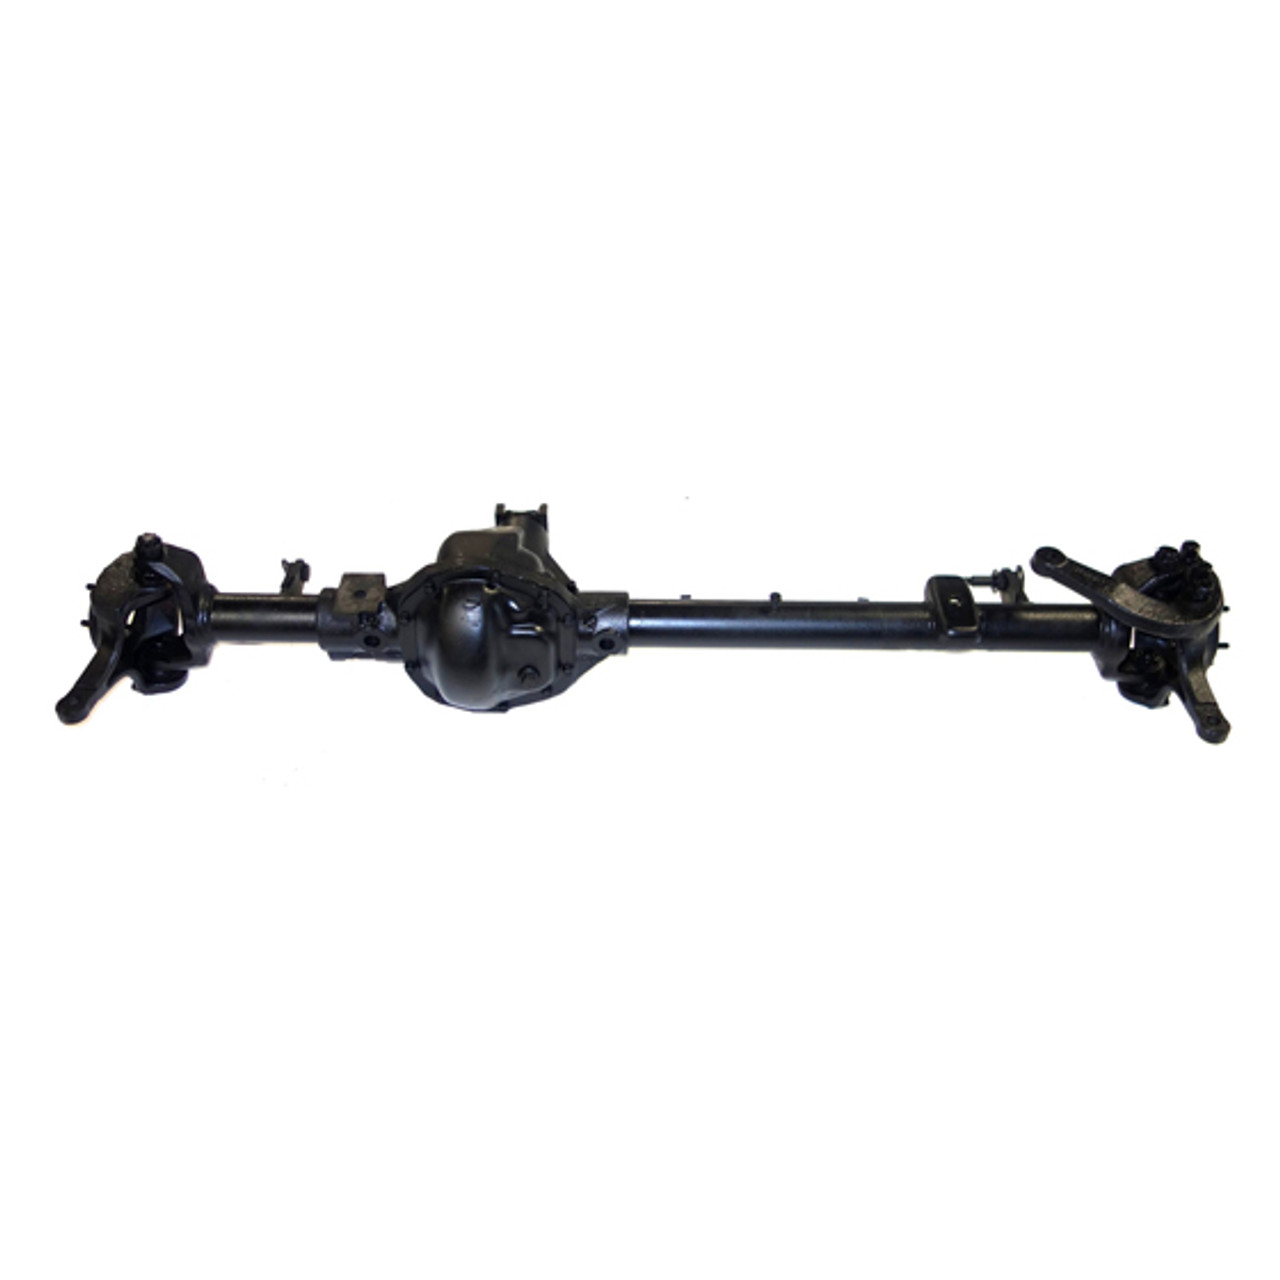 Reman Complete Axle Assembly for Dana 44 2000 Dodge Ram 1500 4.11 Ratio with Rear Wheel ABS